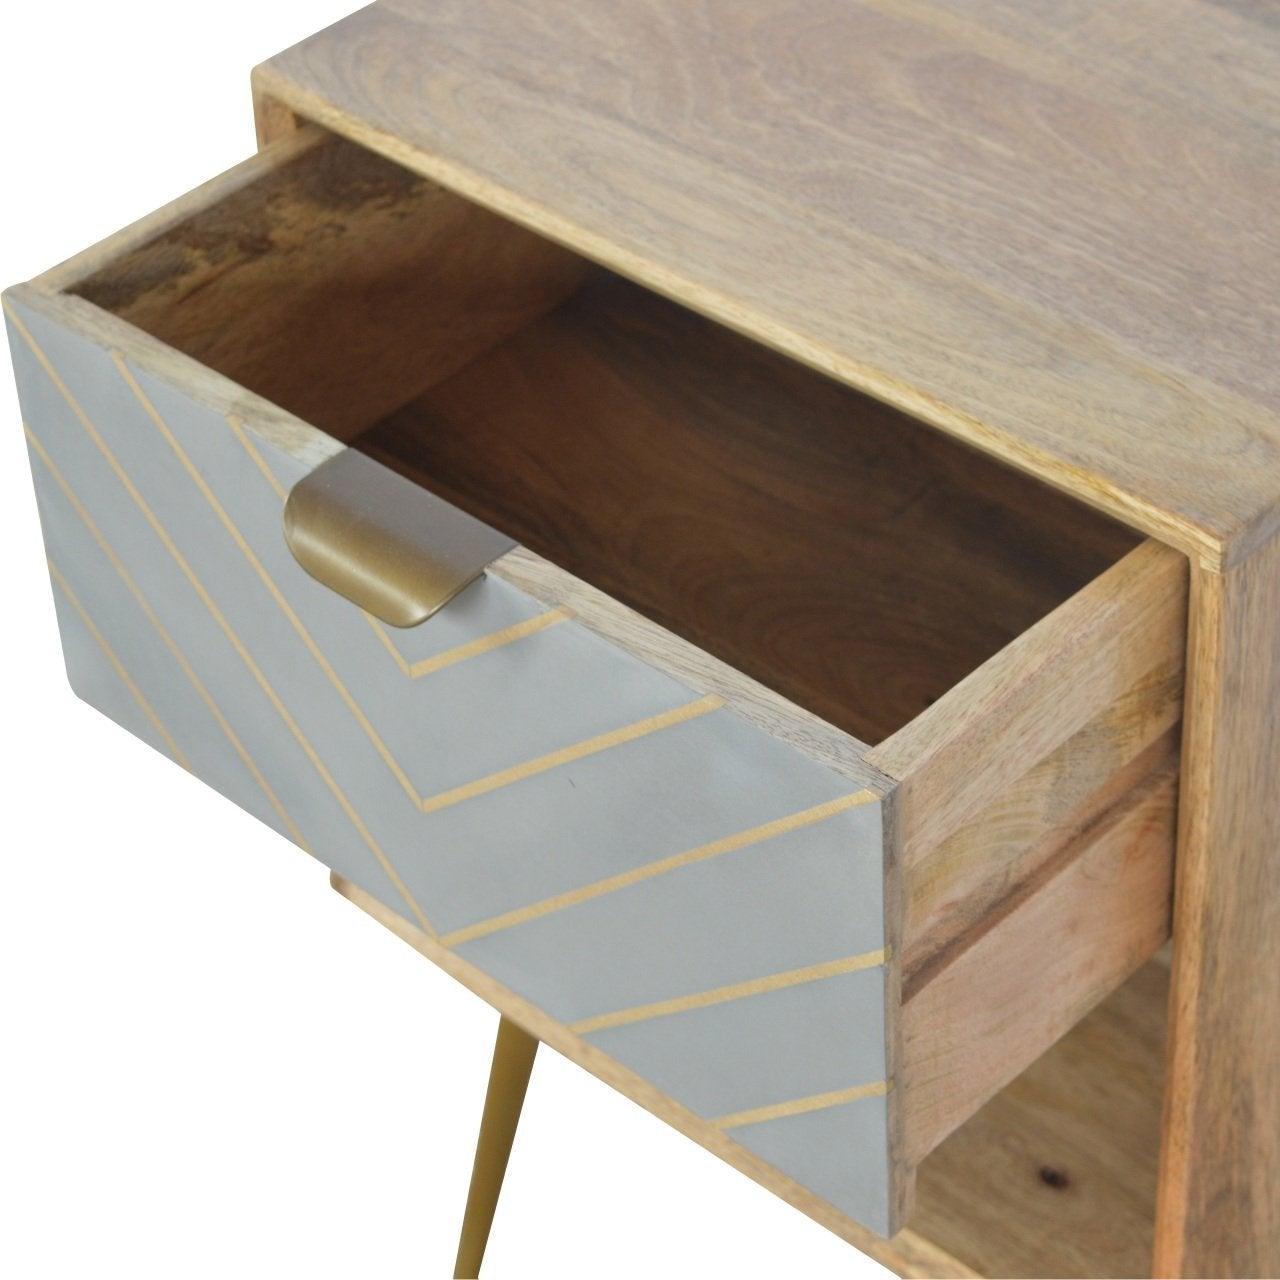 Sleek cement brass inlay bedside table with open slot - crimblefest furniture - image 4